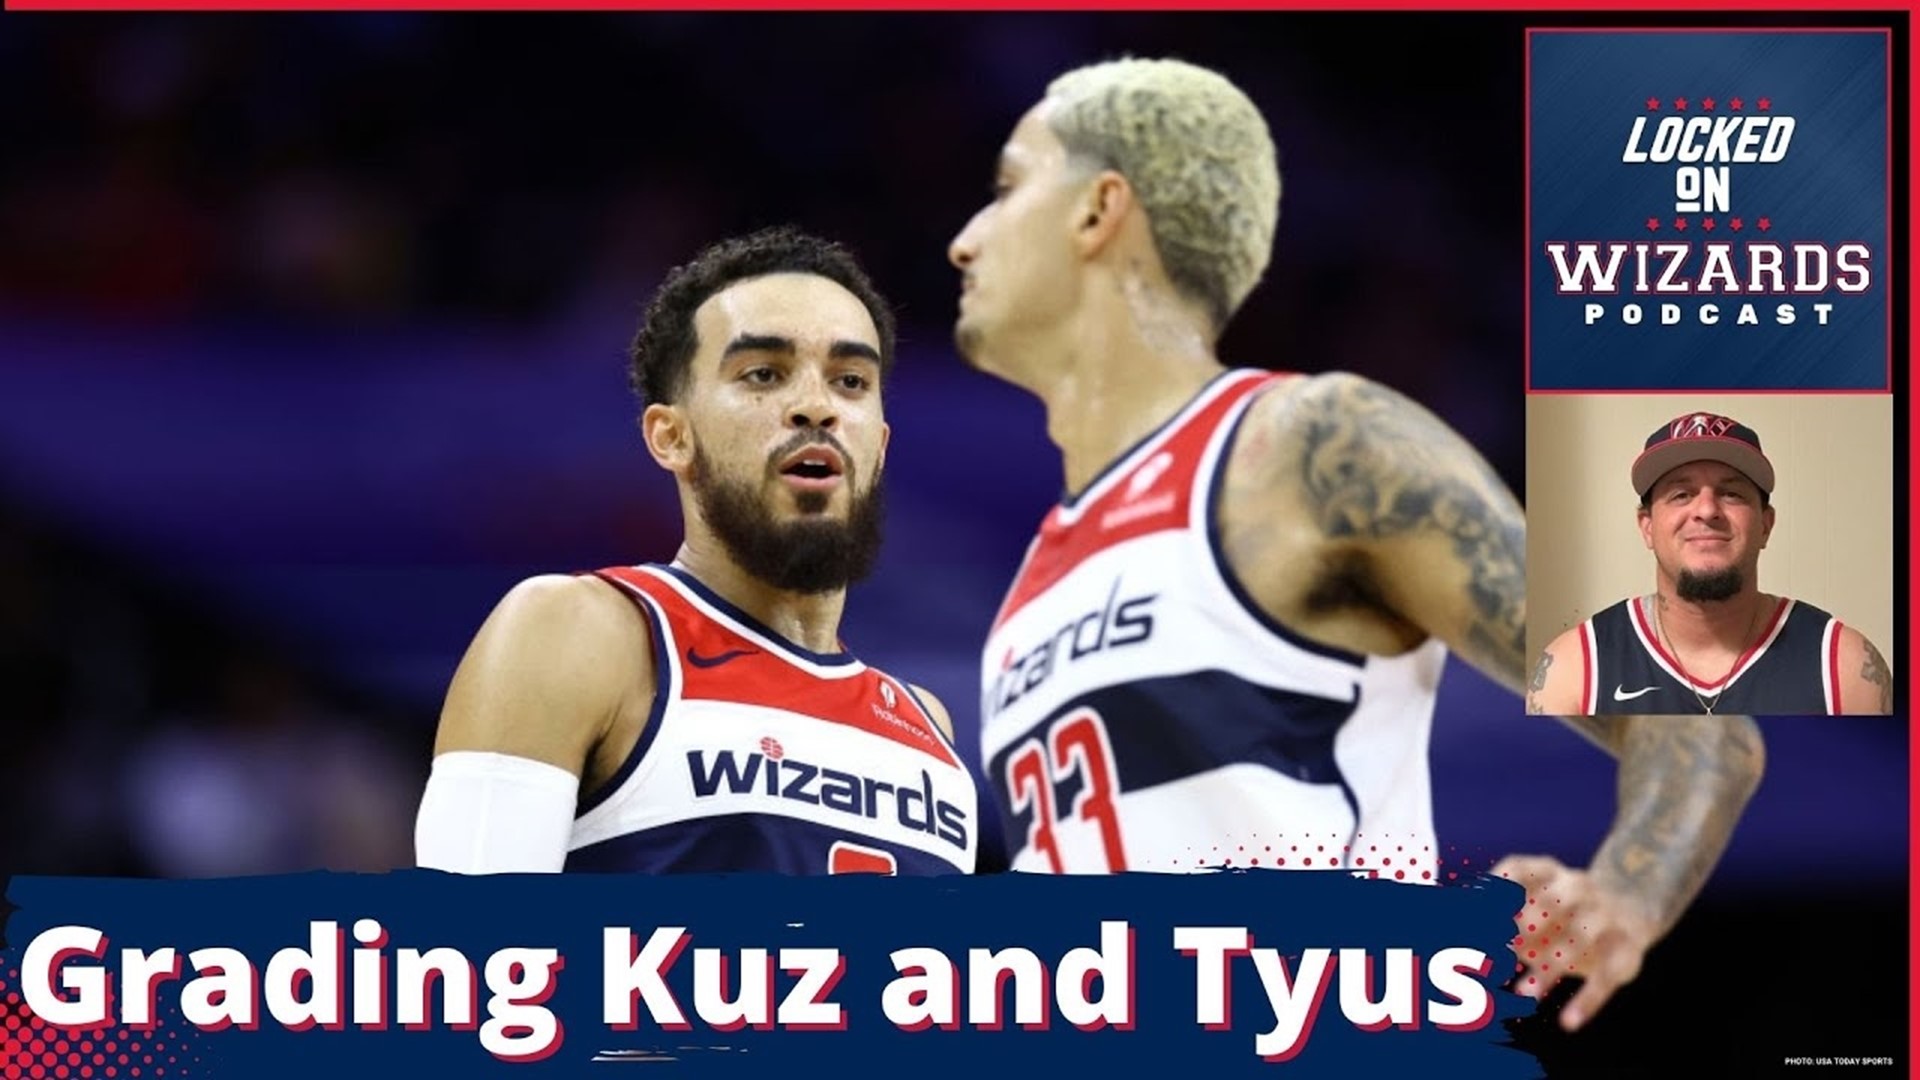 Brandon grades both Kyle Kuzma and Tyus Jones. He also wonders what Bradley Beal's legacy would be in DC.